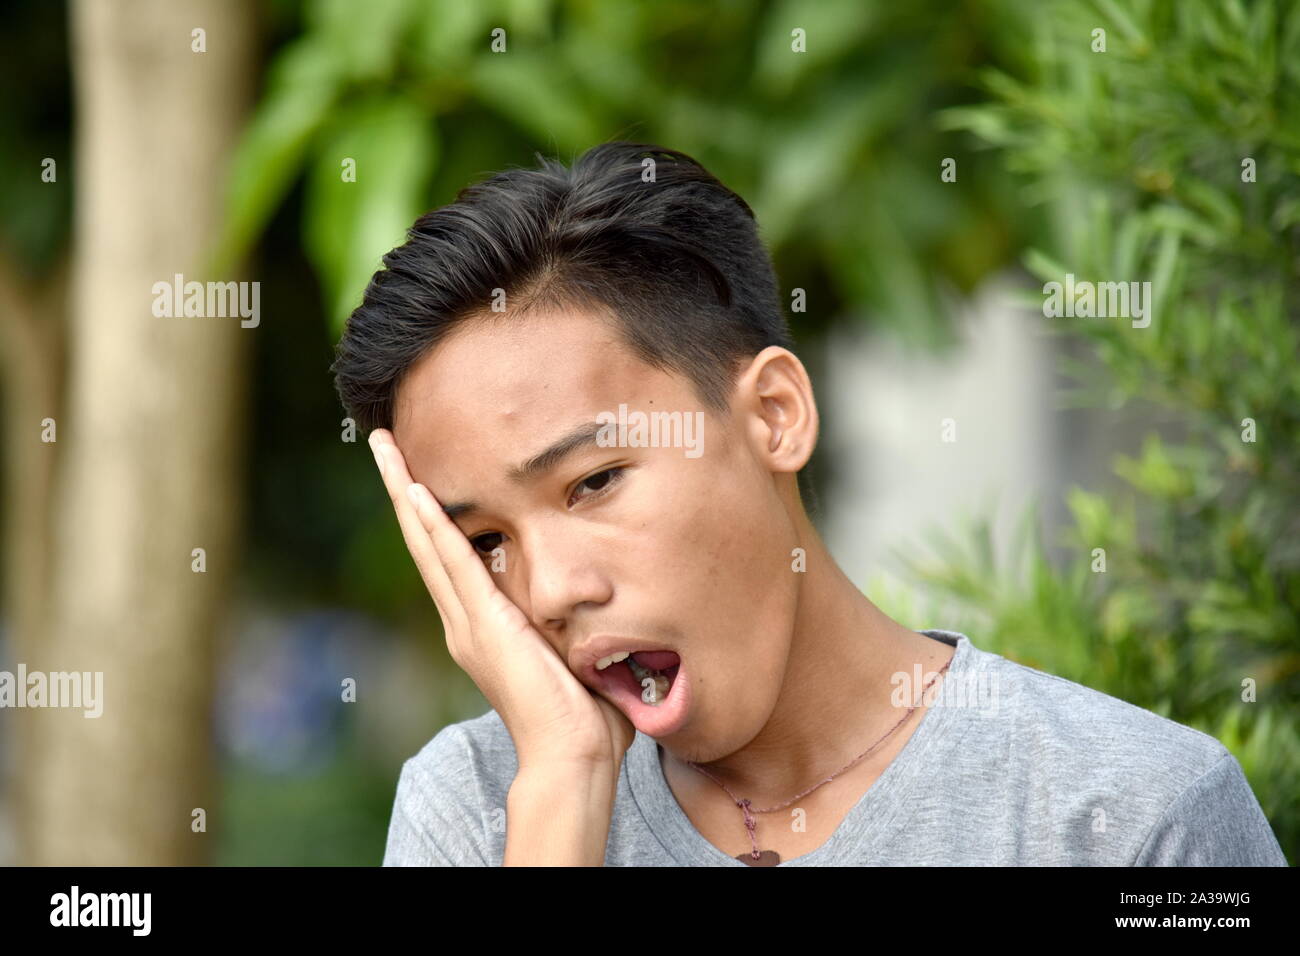 A Yawning Handsome Diverse Boy Stock Photo